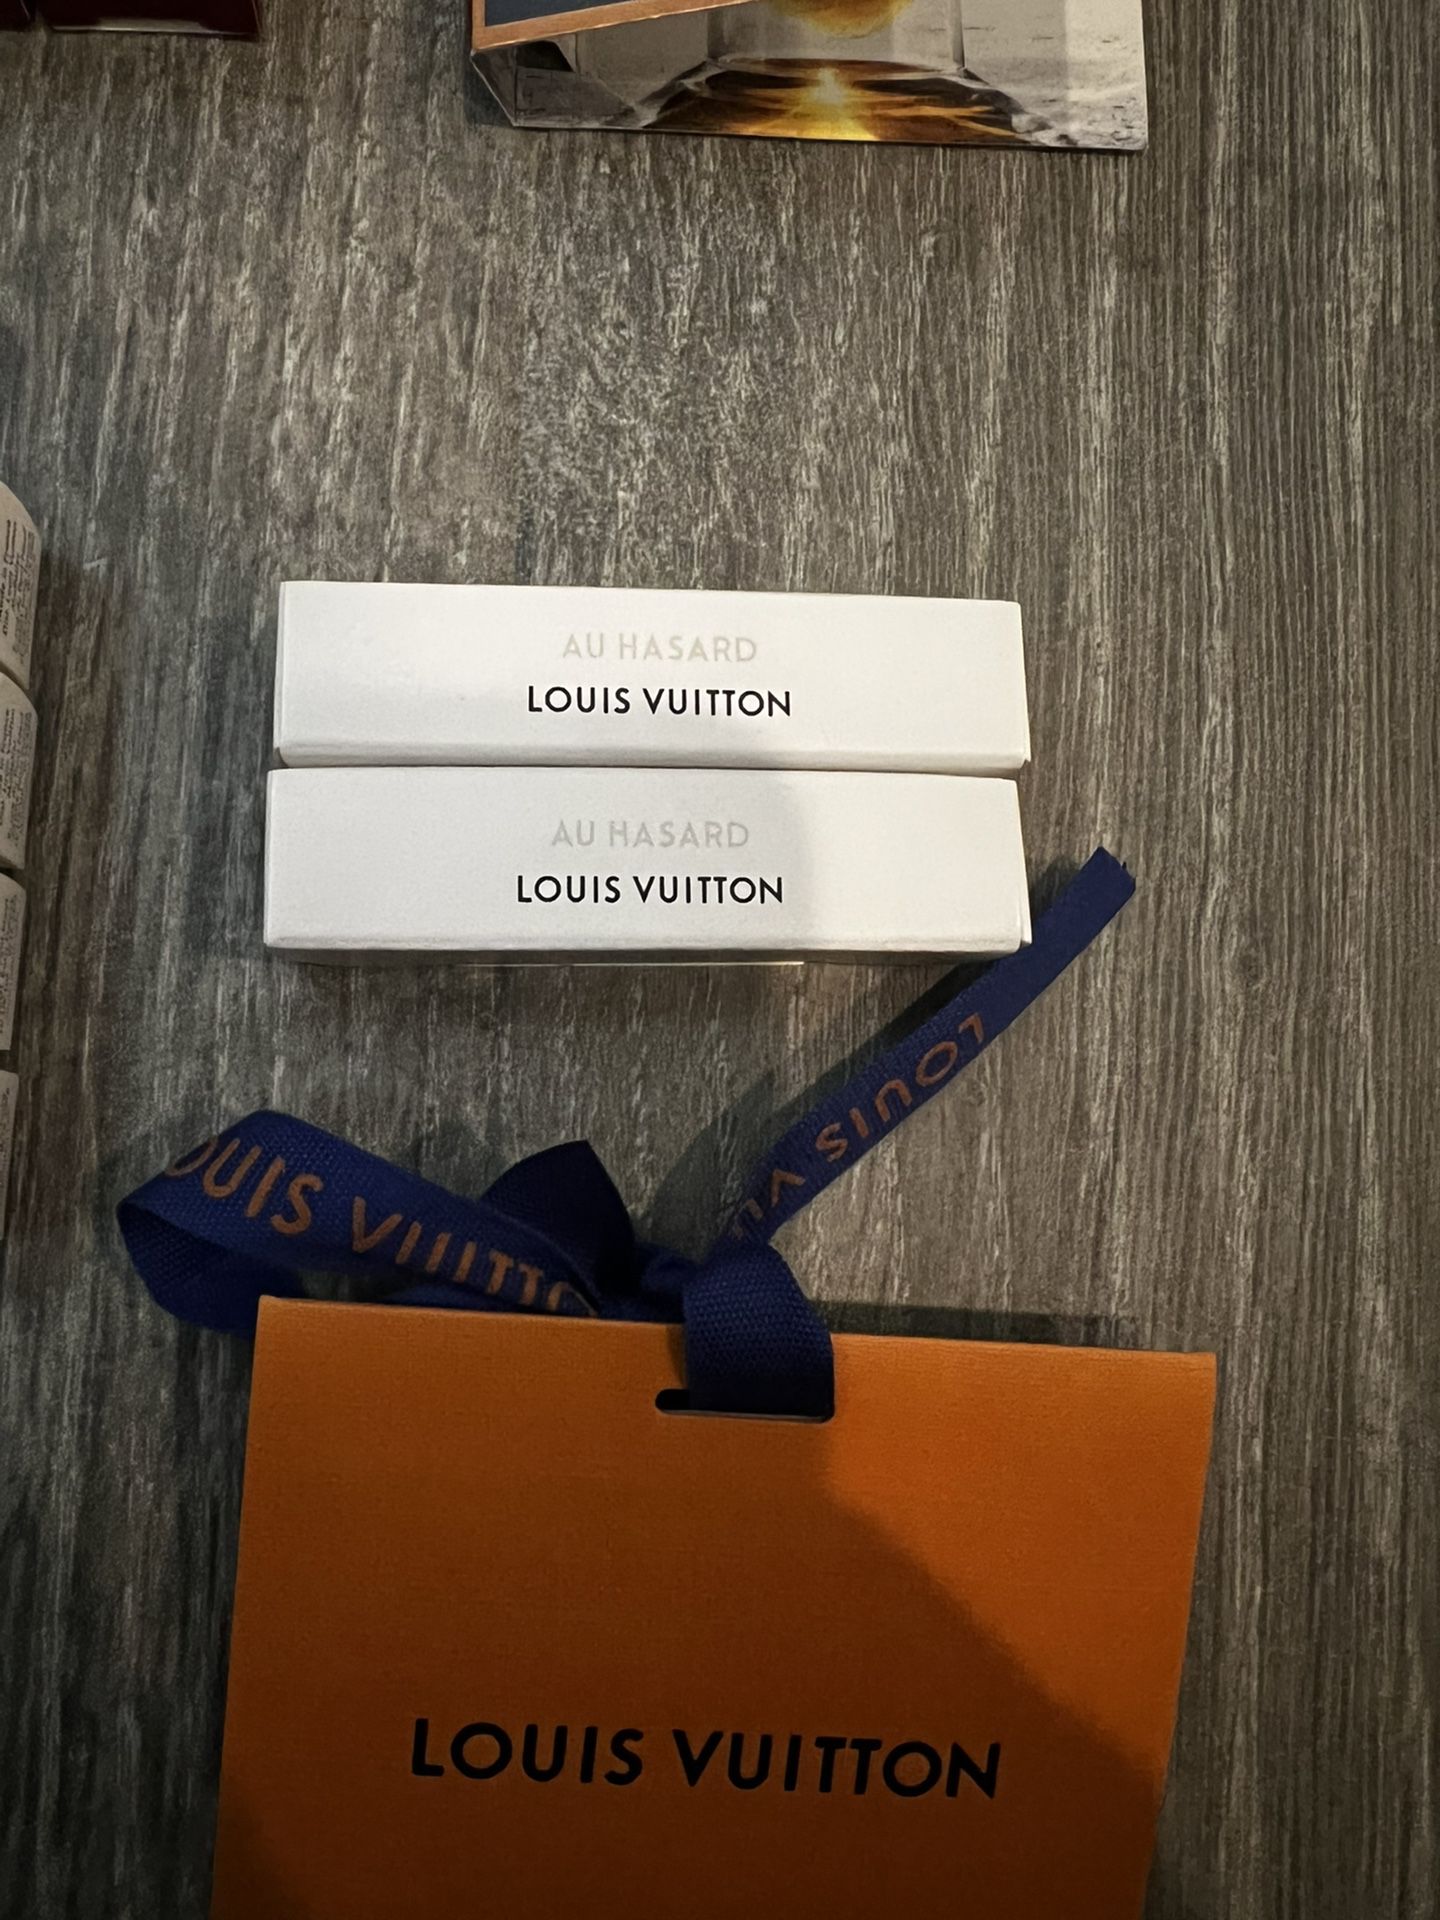 Louie Vuitton Fragrance, Hermes, Cartier Samples for Sale in Irvine, CA -  OfferUp